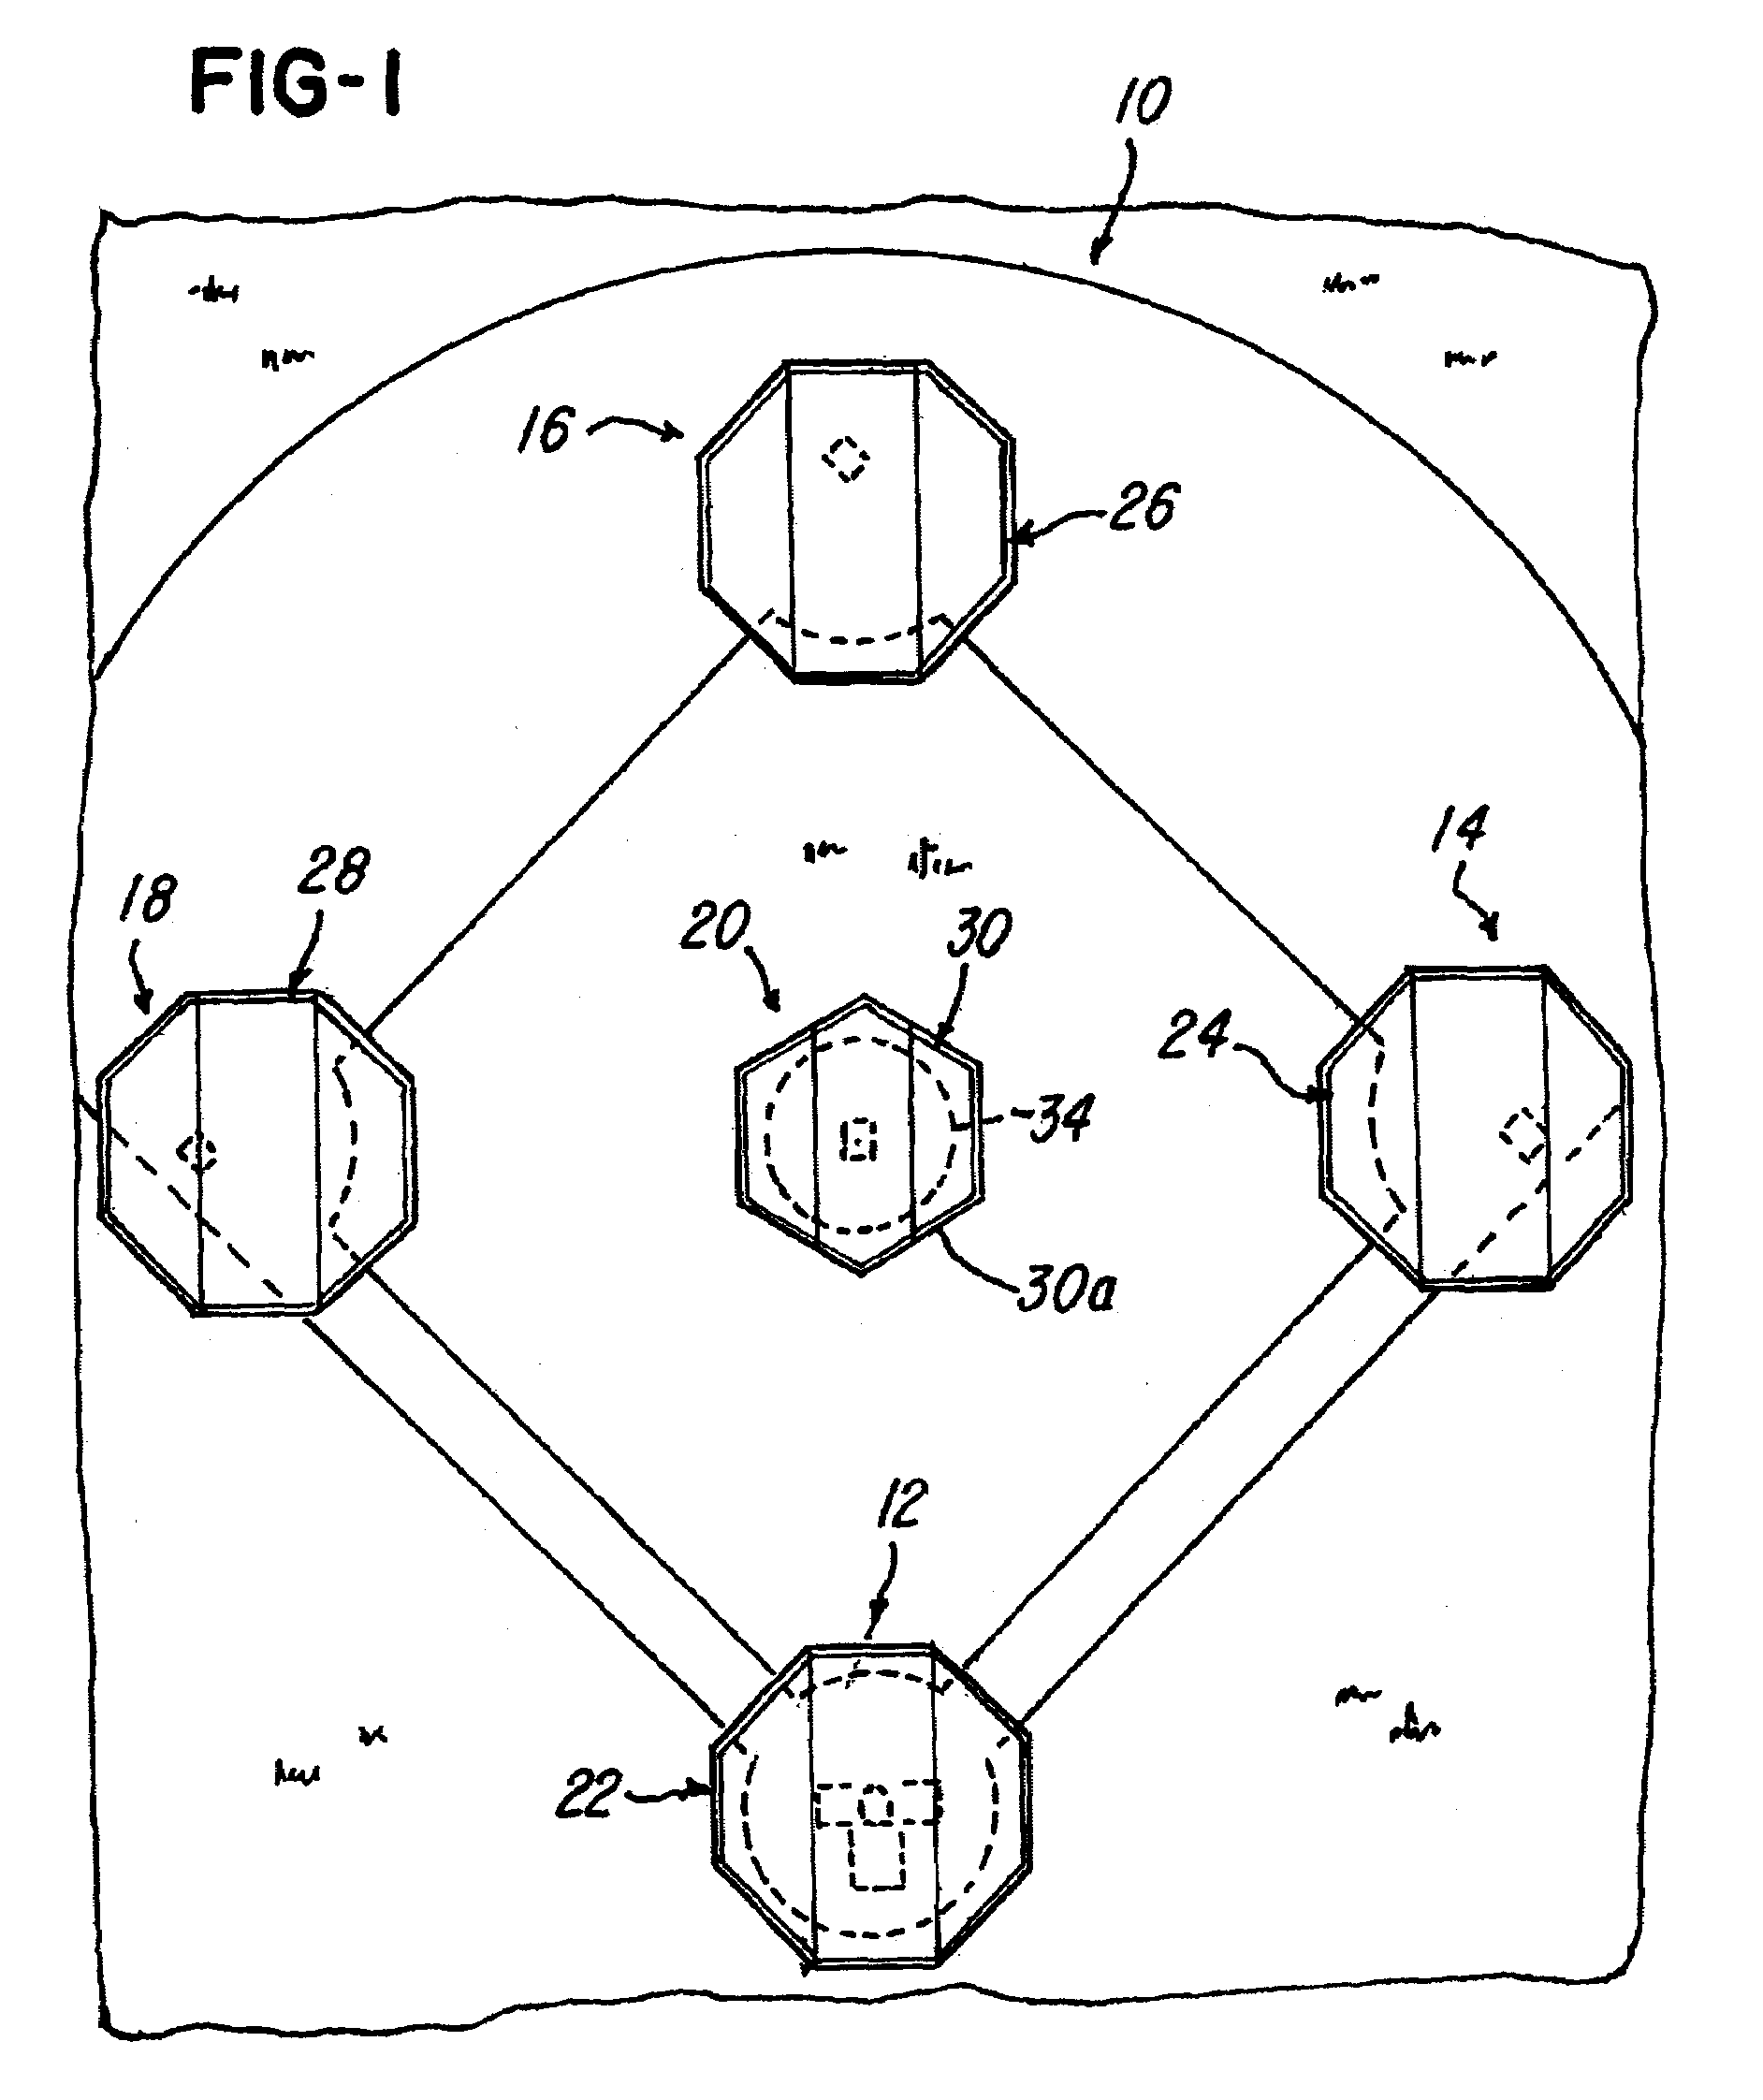 Method for protecting at least one baseball area of a baseball playing field